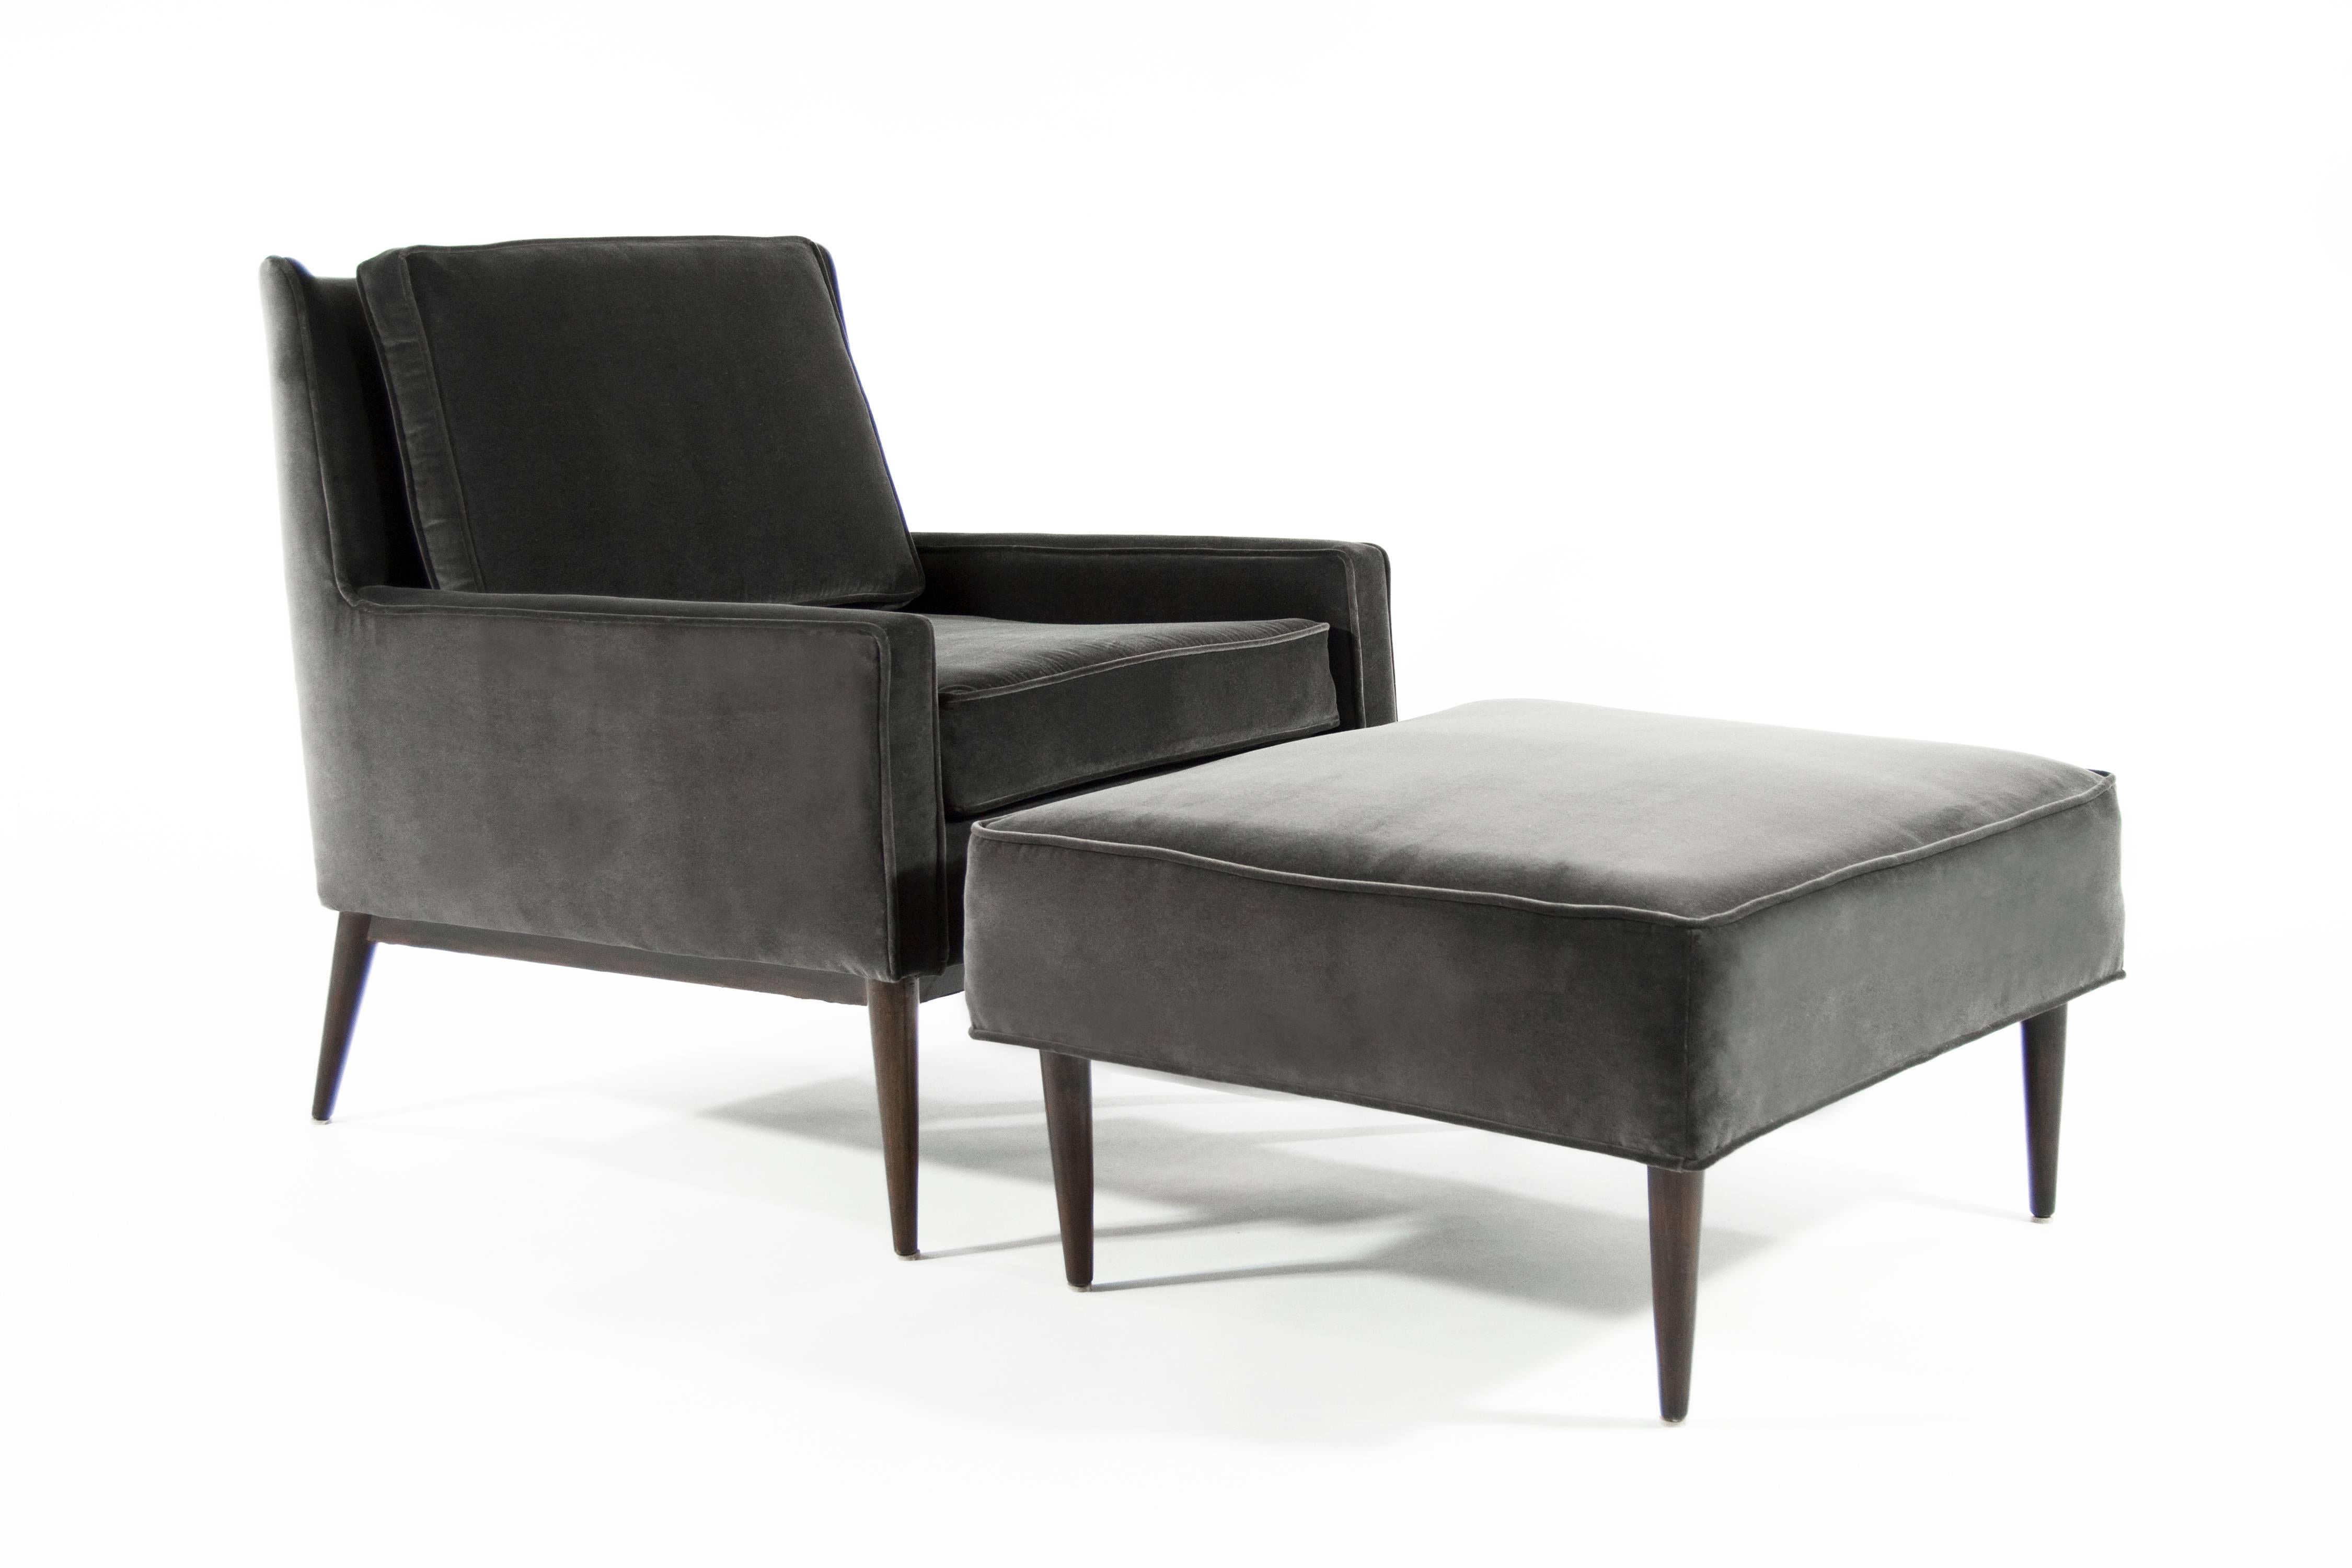 Mid-Century Modern Lounge Chair and Ottoman by Paul McCobb for Directional, circa 1950s